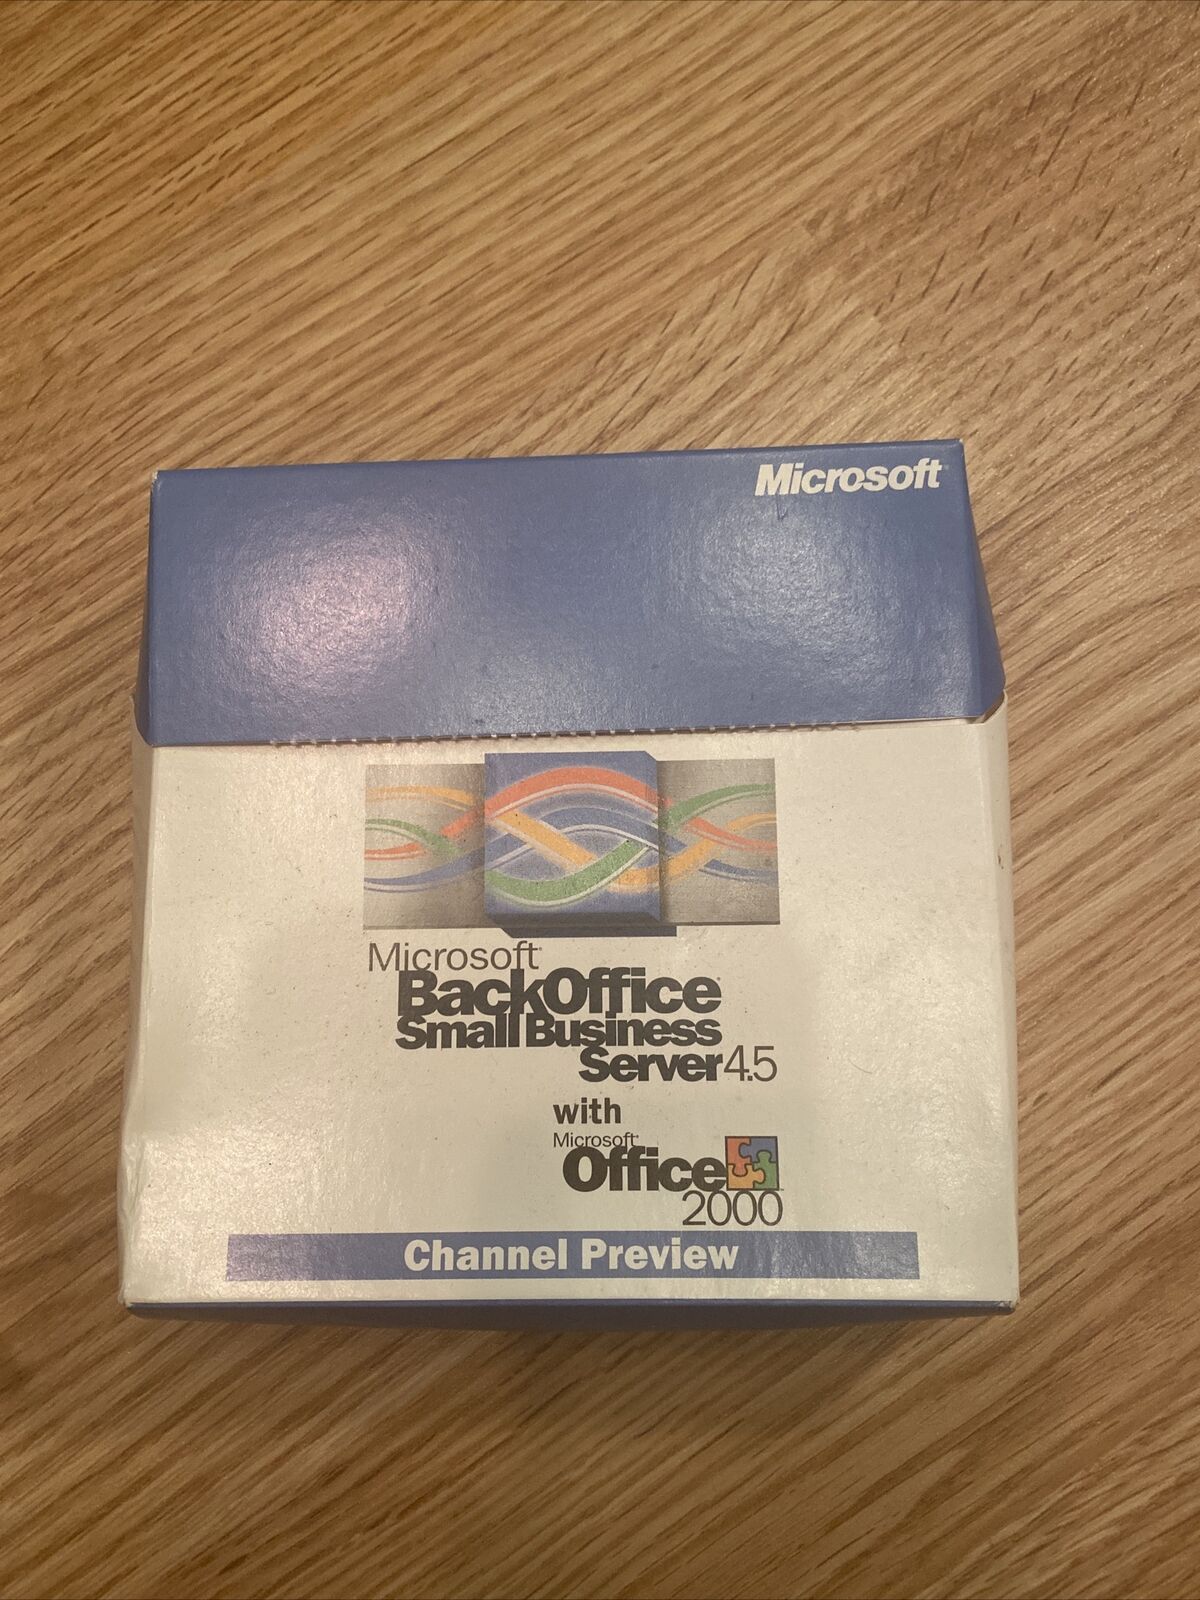 Microsoft back office small business server 4.5 channel preview Super Rare New